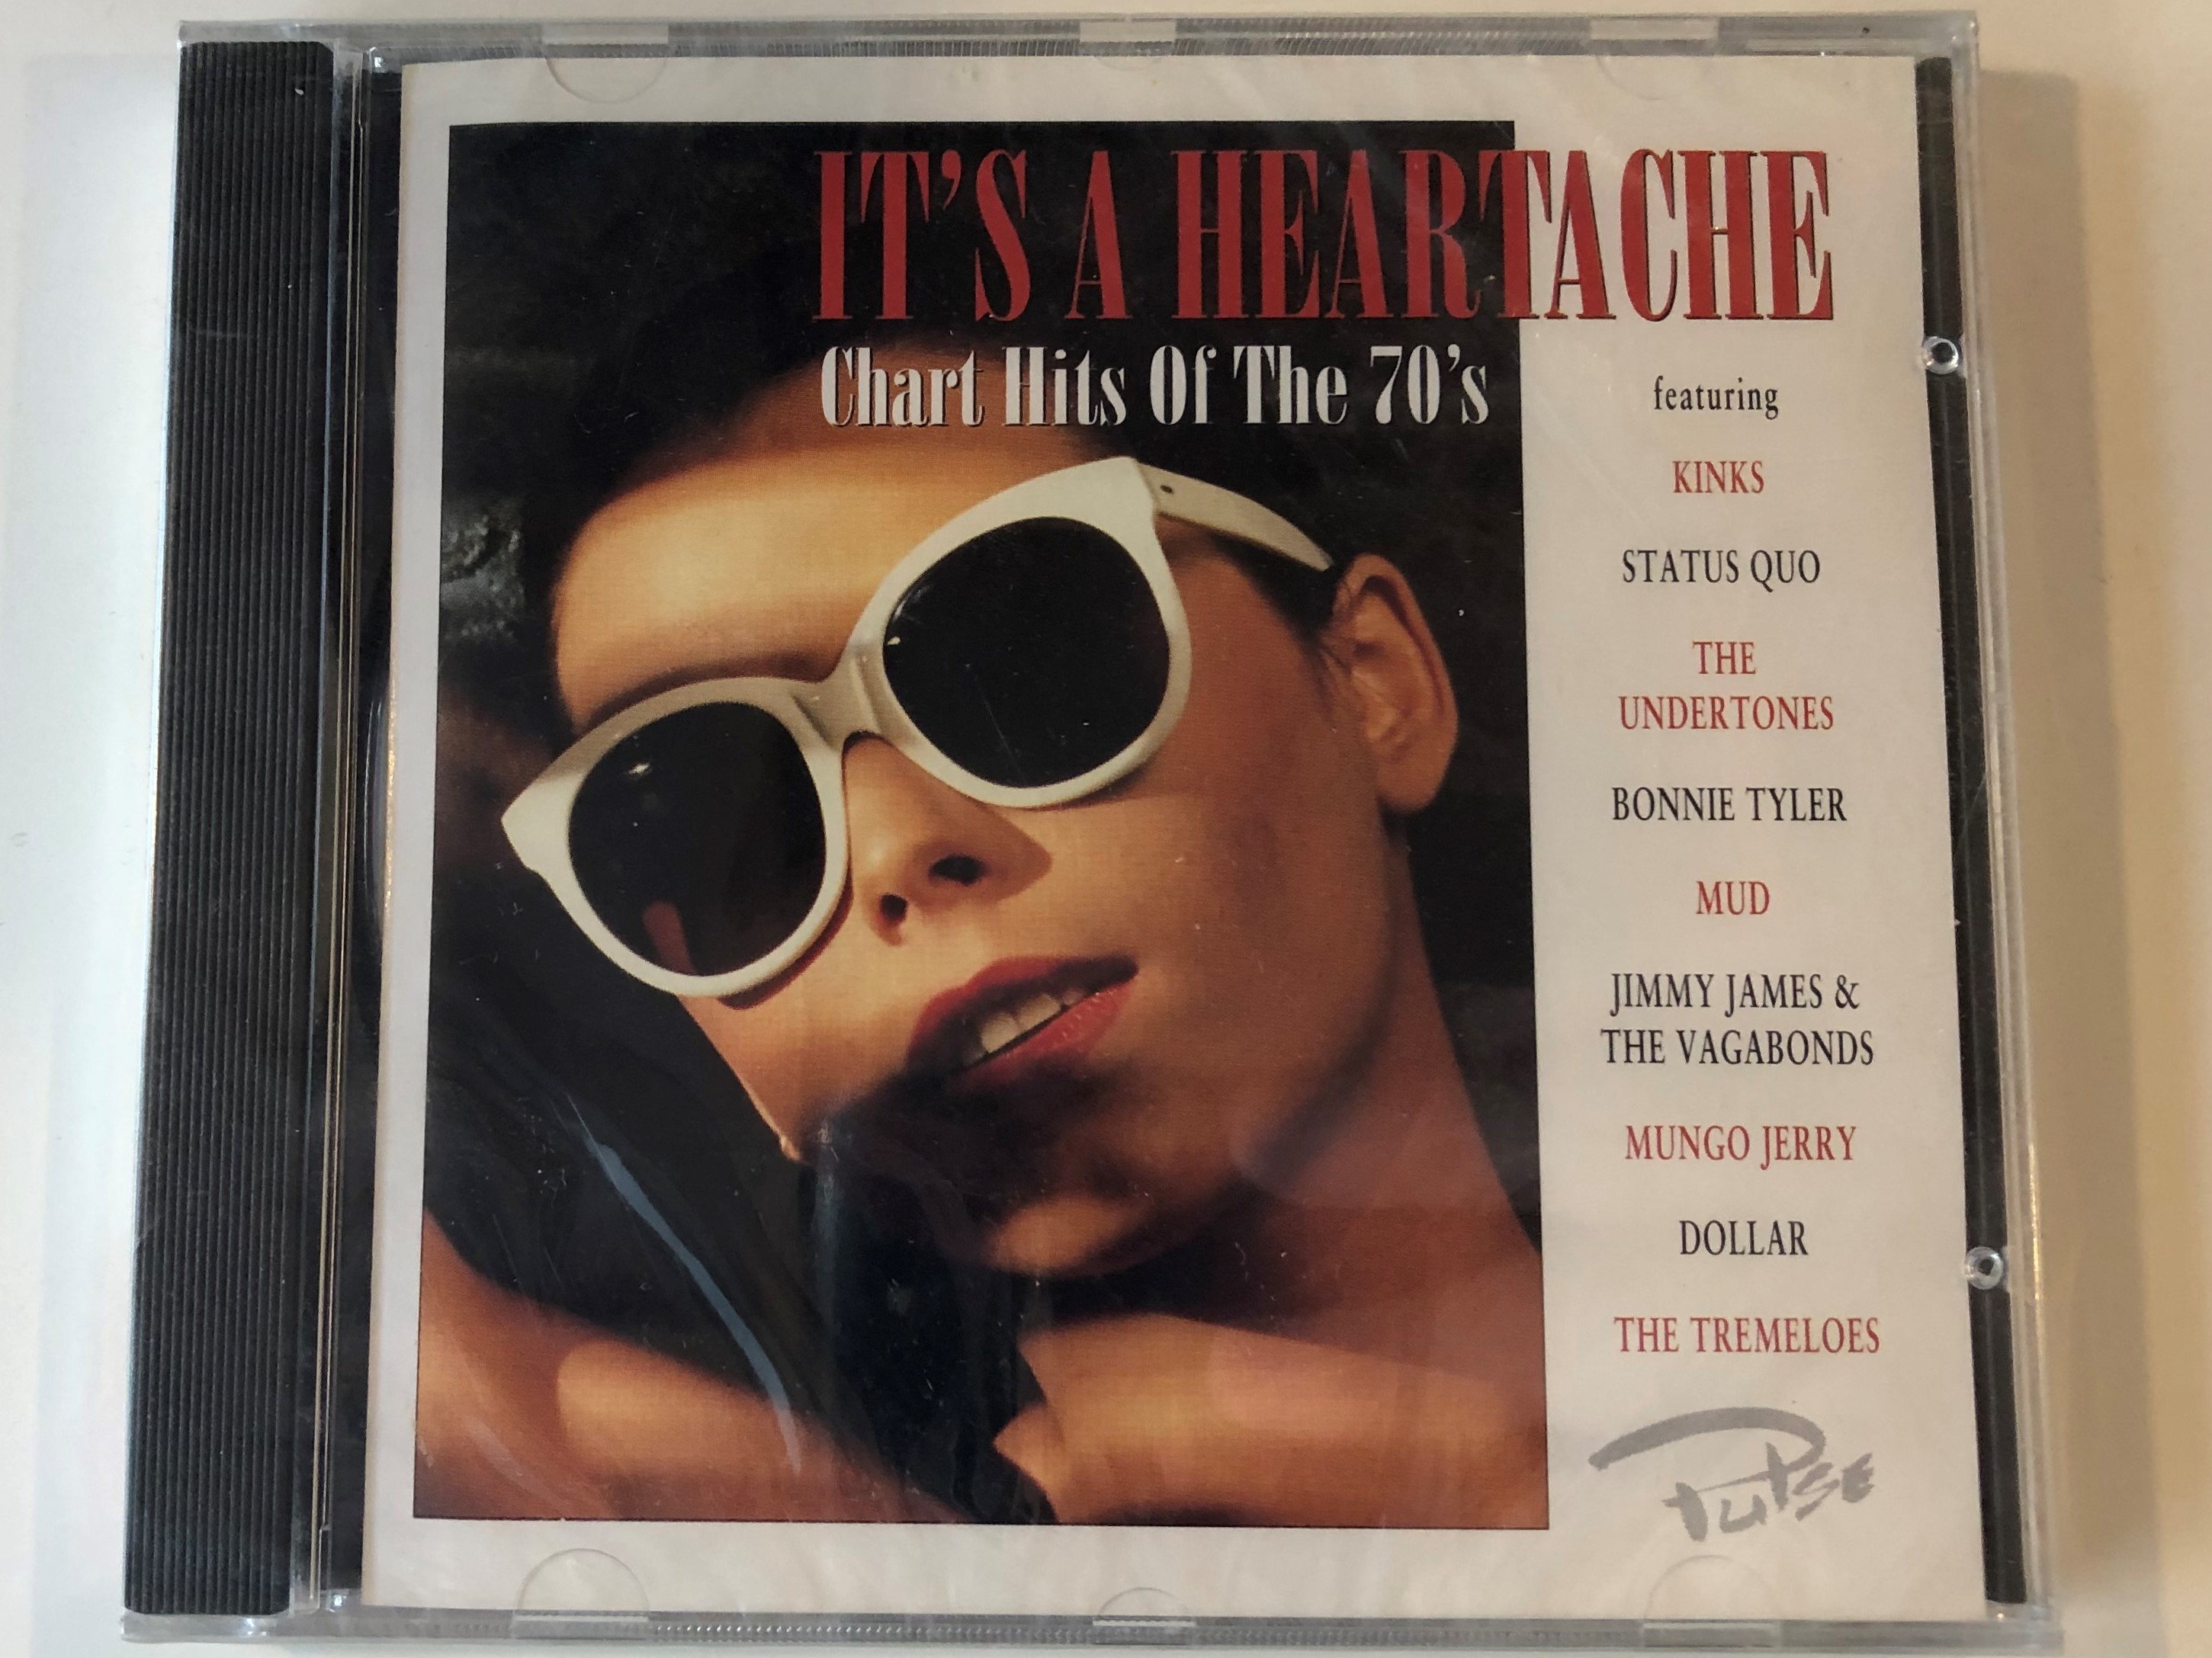 it-s-a-heartache-chart-hits-of-the-70-s-featuring-kinks-status-quo-the-under-tones-bonnie-tyler-mud-jimmy-james-the-vagabonds-mungo-jerry-dollar-the-tremeloes-pulse-audio-cd-1996-1-.jpg